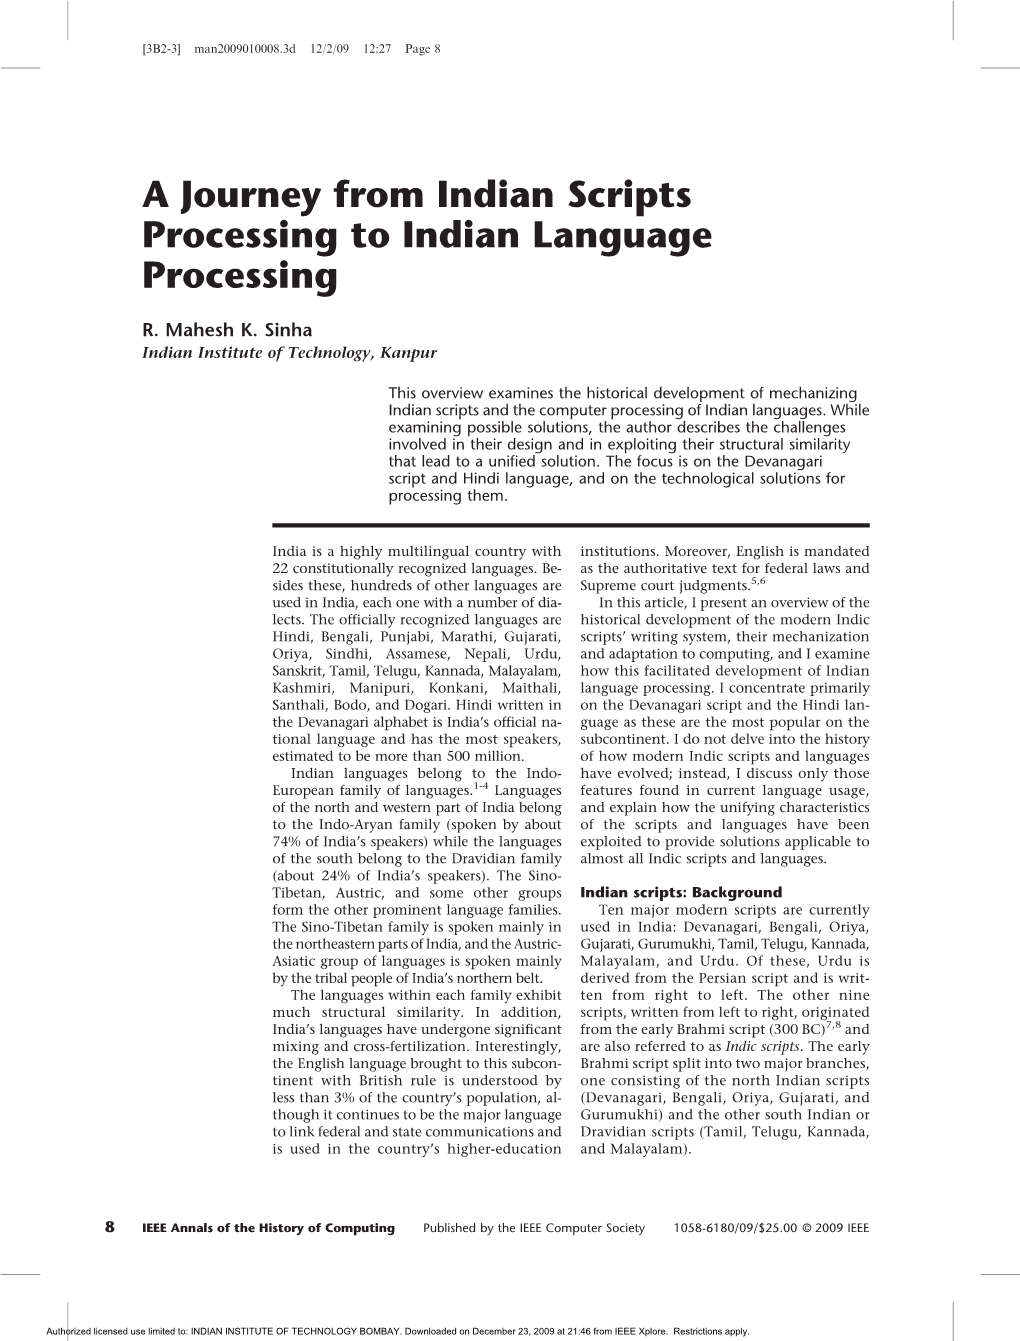 A Journey from Indian Scripts Processing to Indian Language Processing